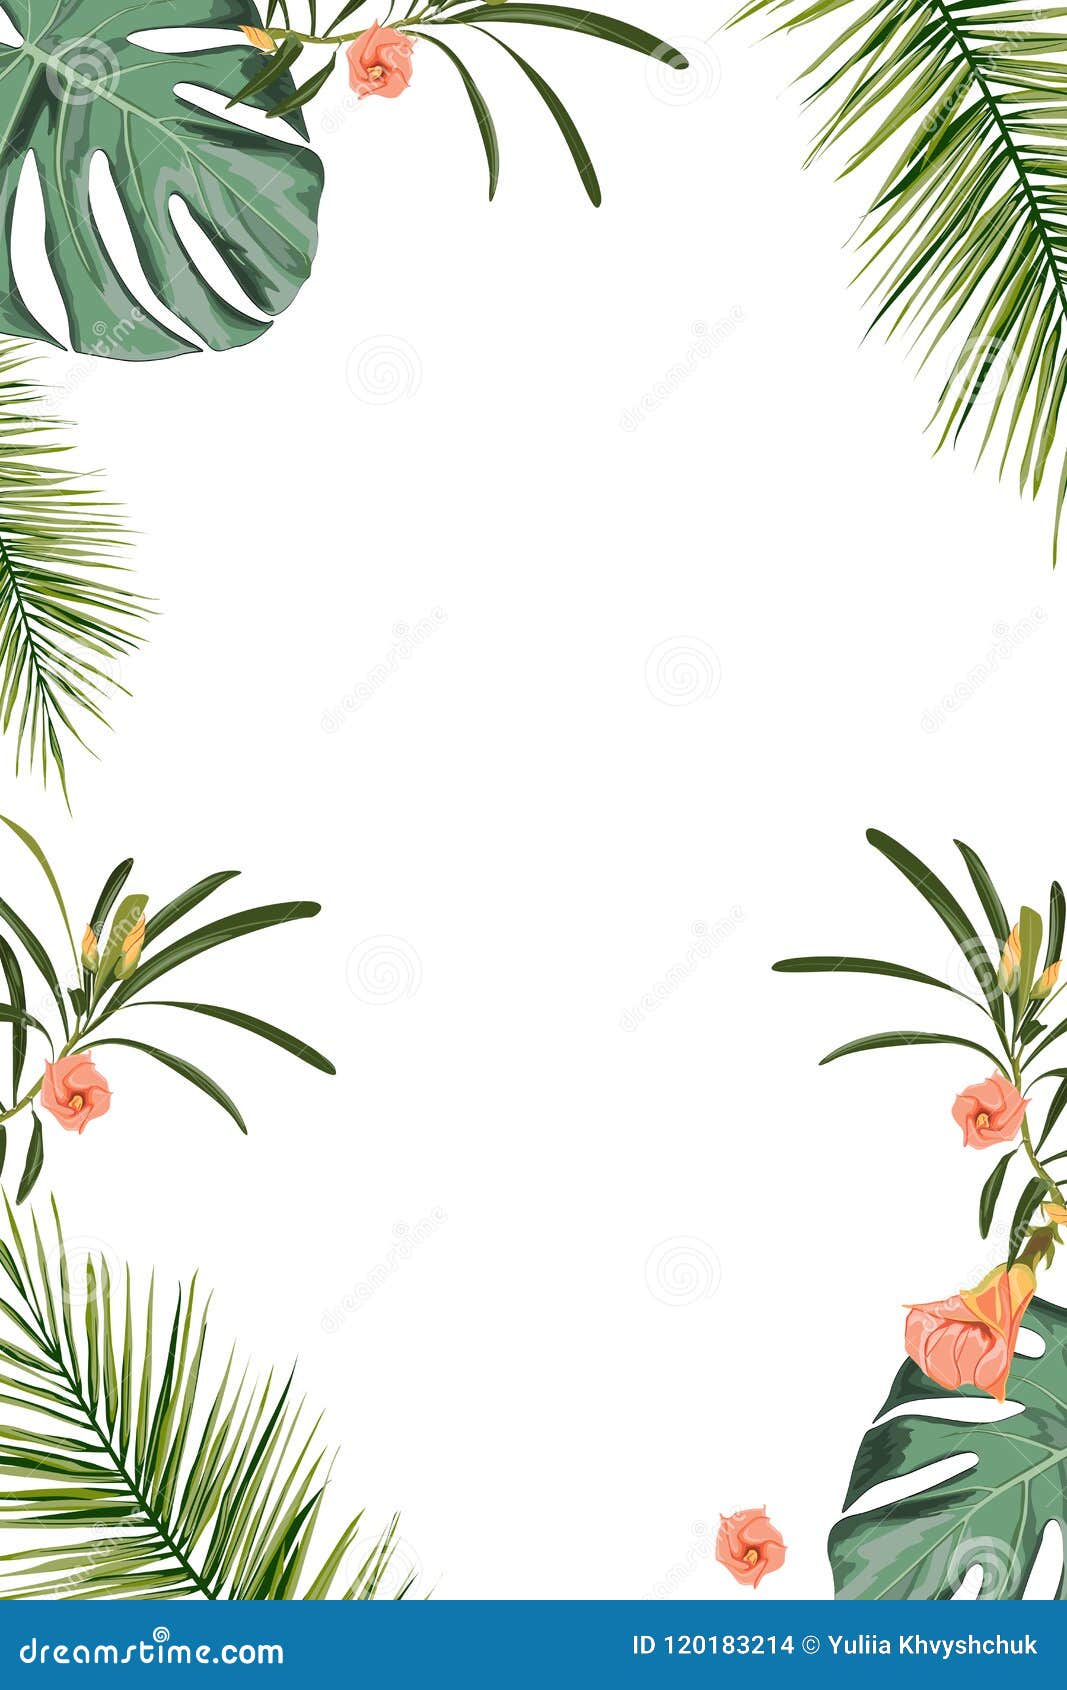 Template Of Palm Leaf